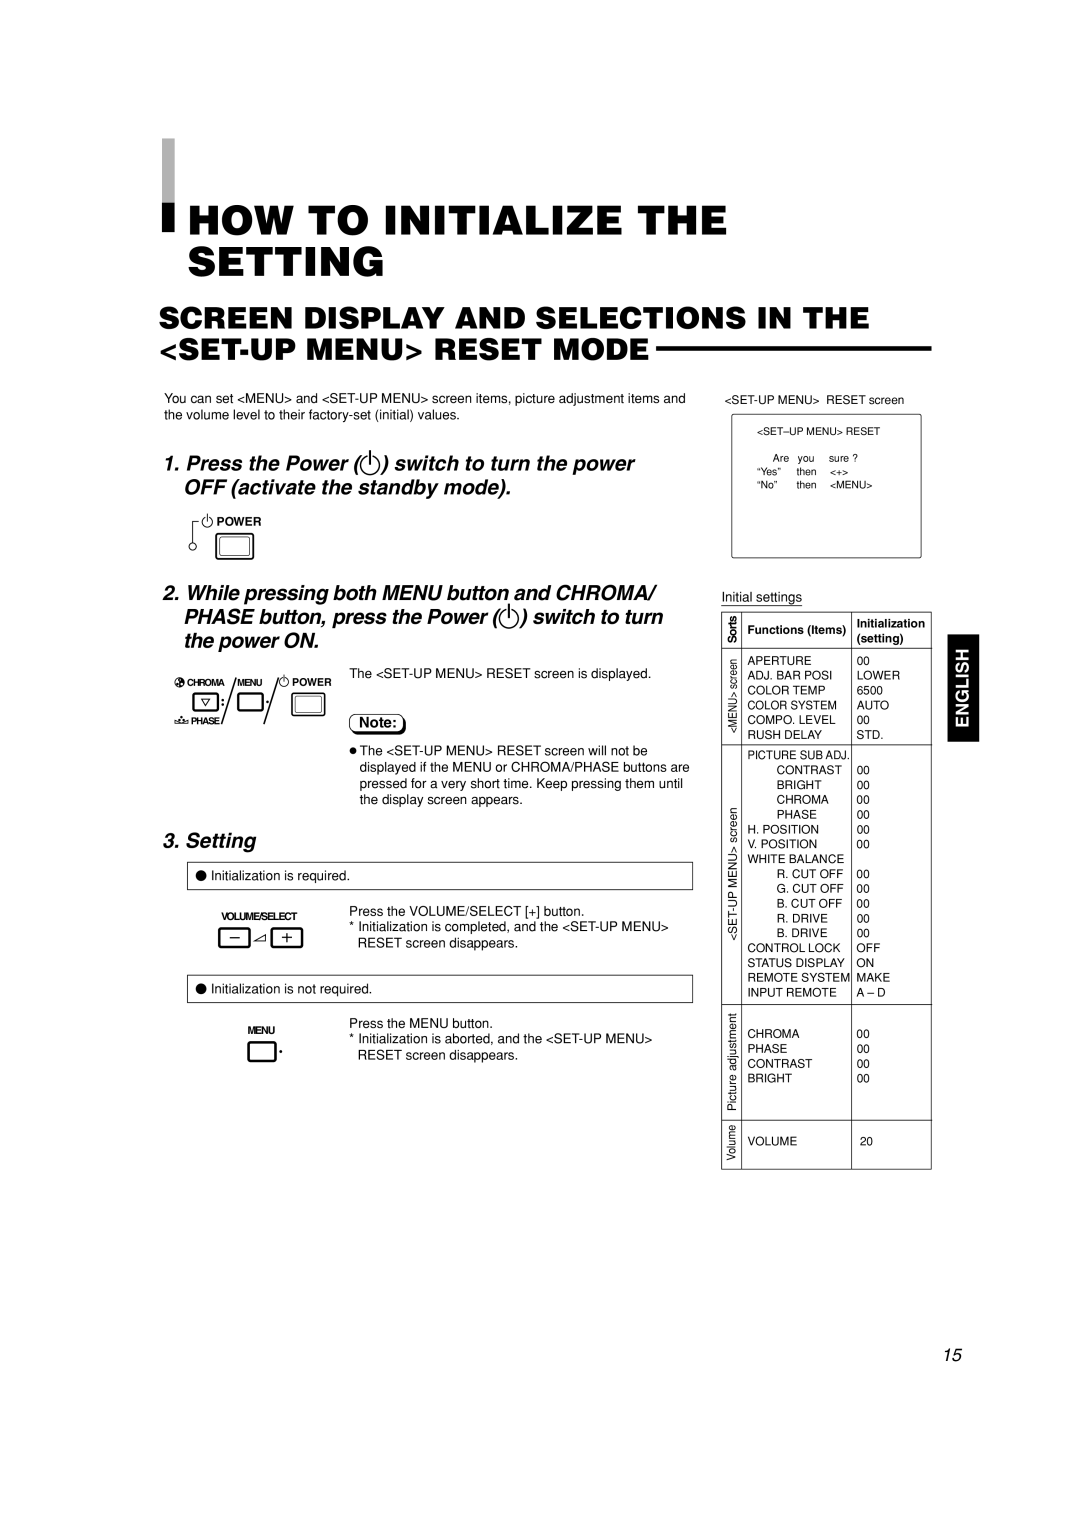 JVC TM-H1950CG manual HOW to Initialize the Setting, Screen Display and Selections in the SET-UP Menu Reset Mode 